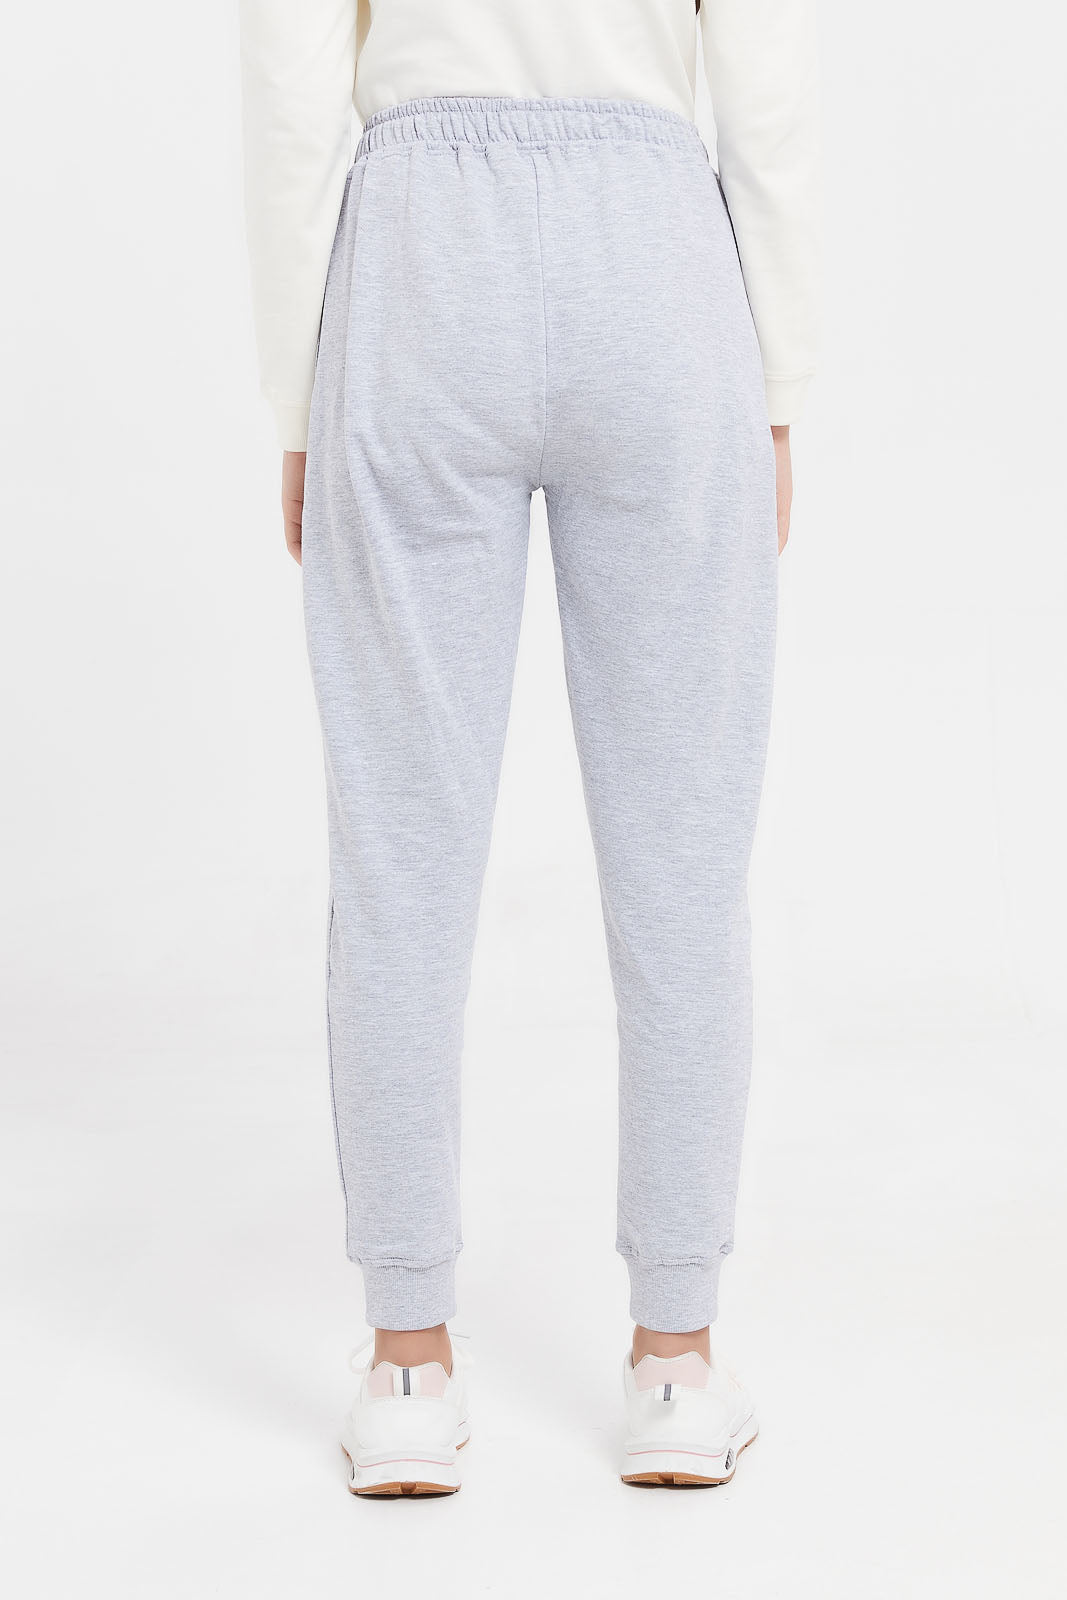 New Look cuffed jogger in light gray